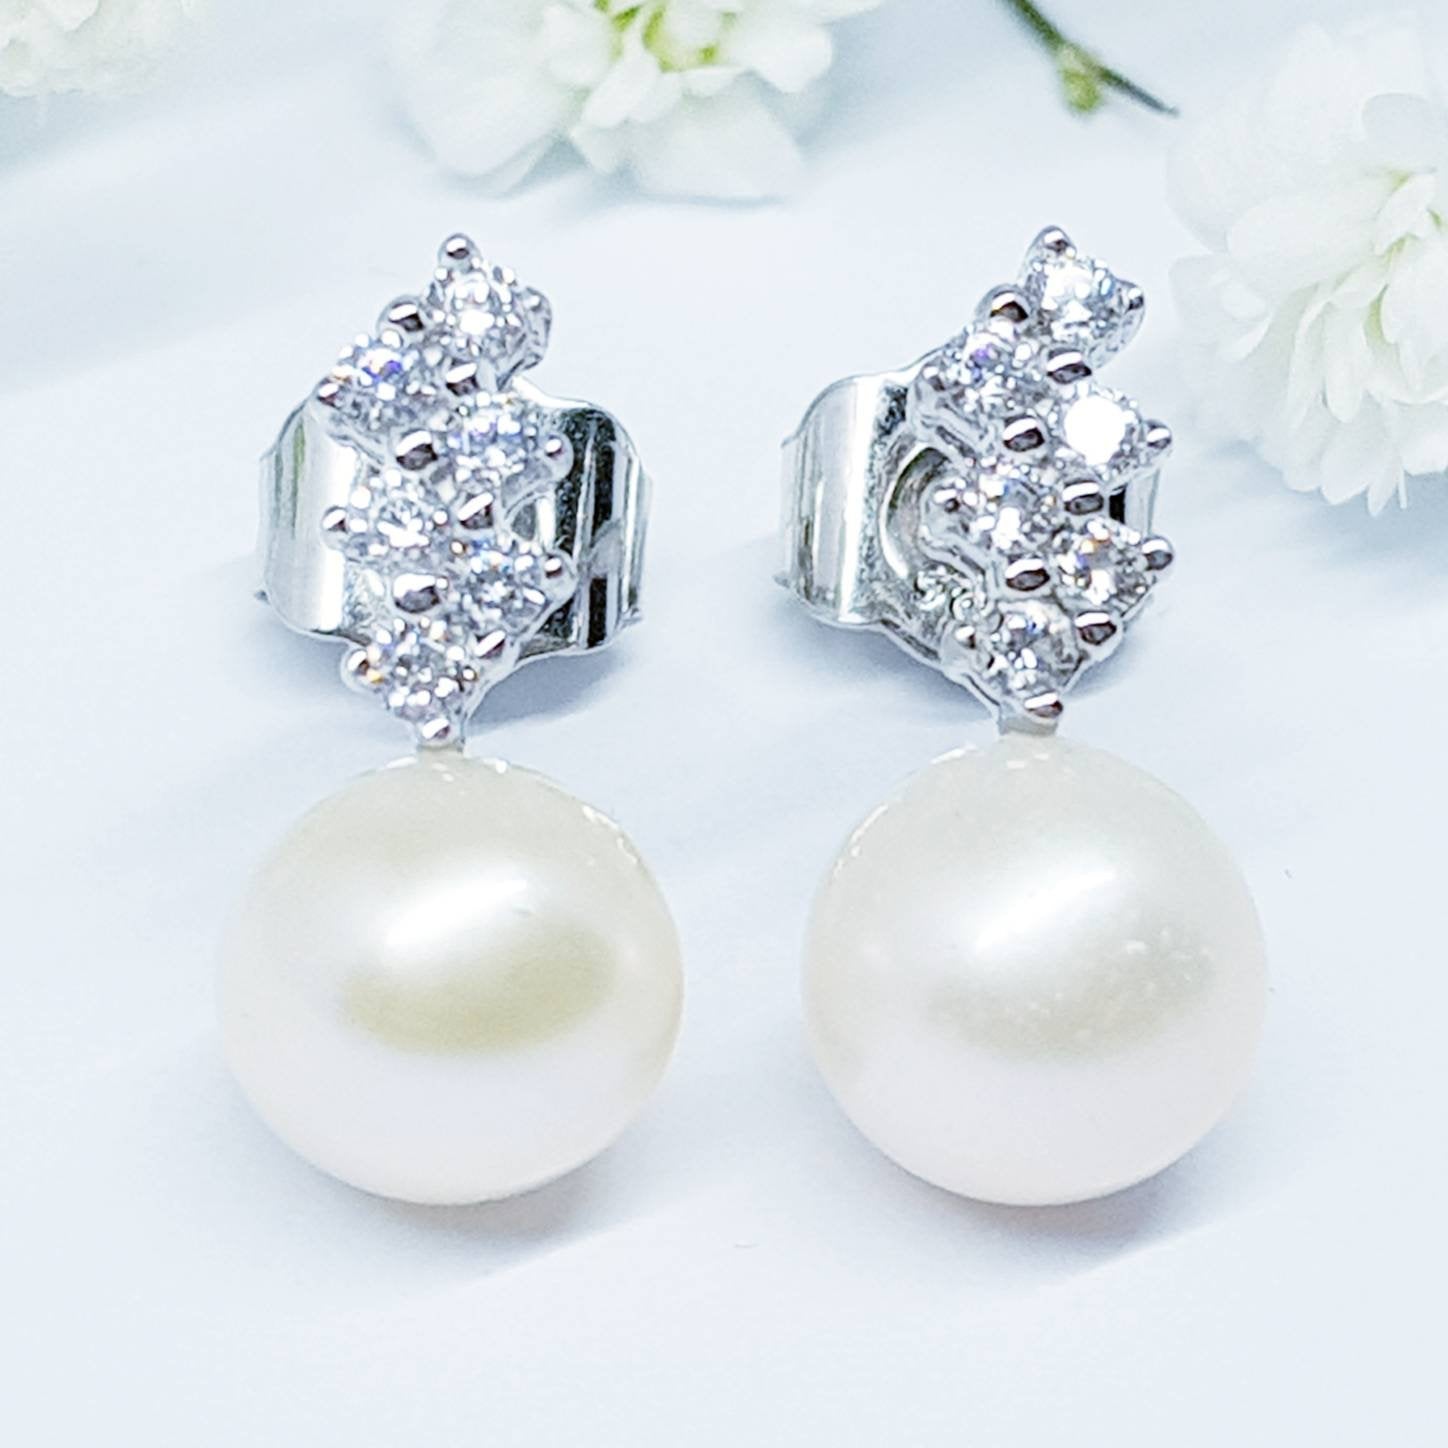 Cultured Pearl Earrings, Natural Pearls, White Pearl Earrings, June Birthstone, June Earrings, Bridal Pearl Earrings, Silver Pearl Earrings